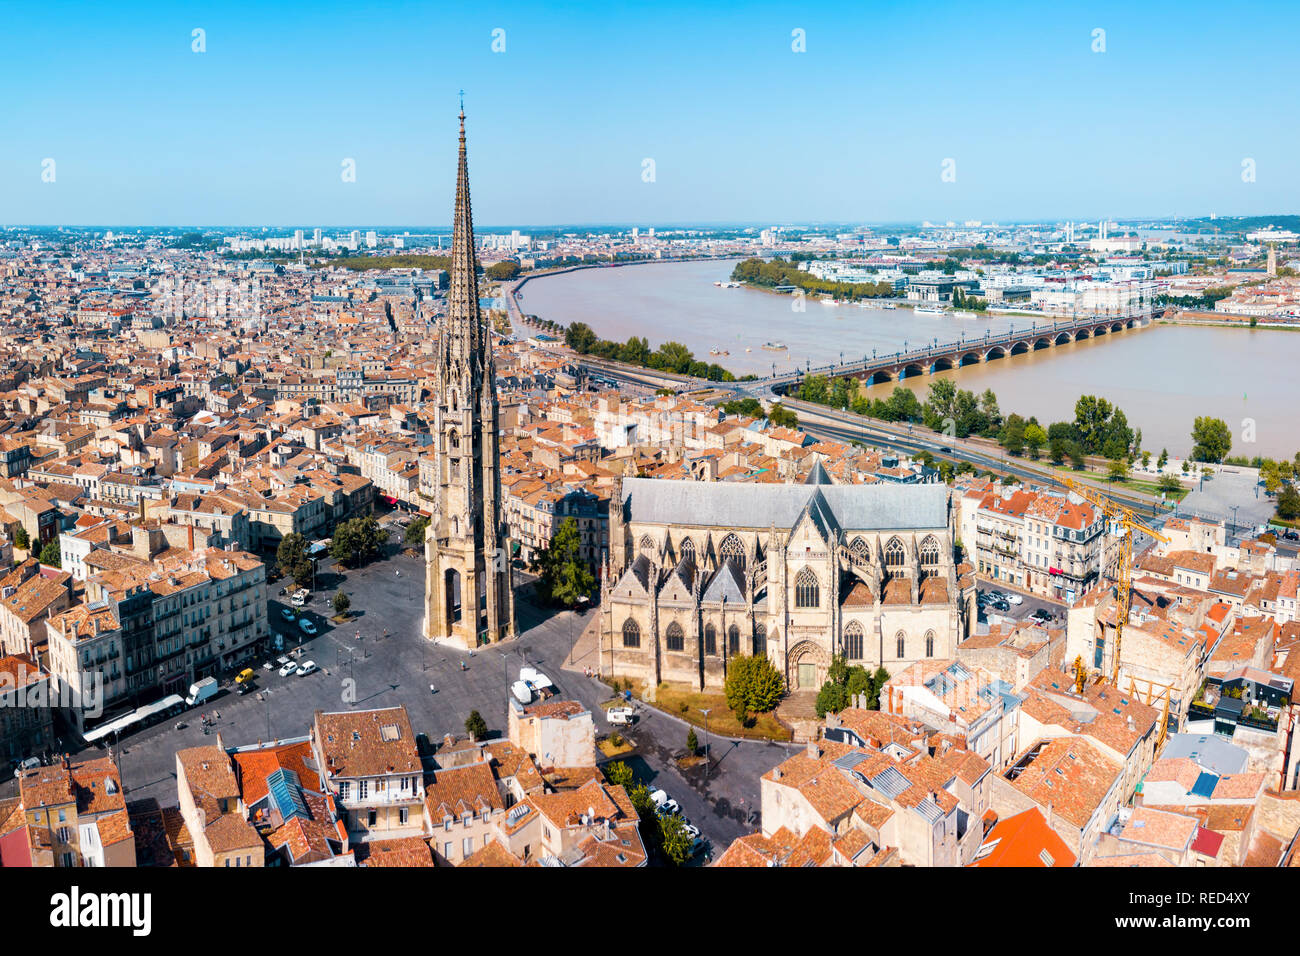 Bordeaux aerial panoramic view. Bordeaux is a port city on the Garonne river in Southwestern France Stock Photo